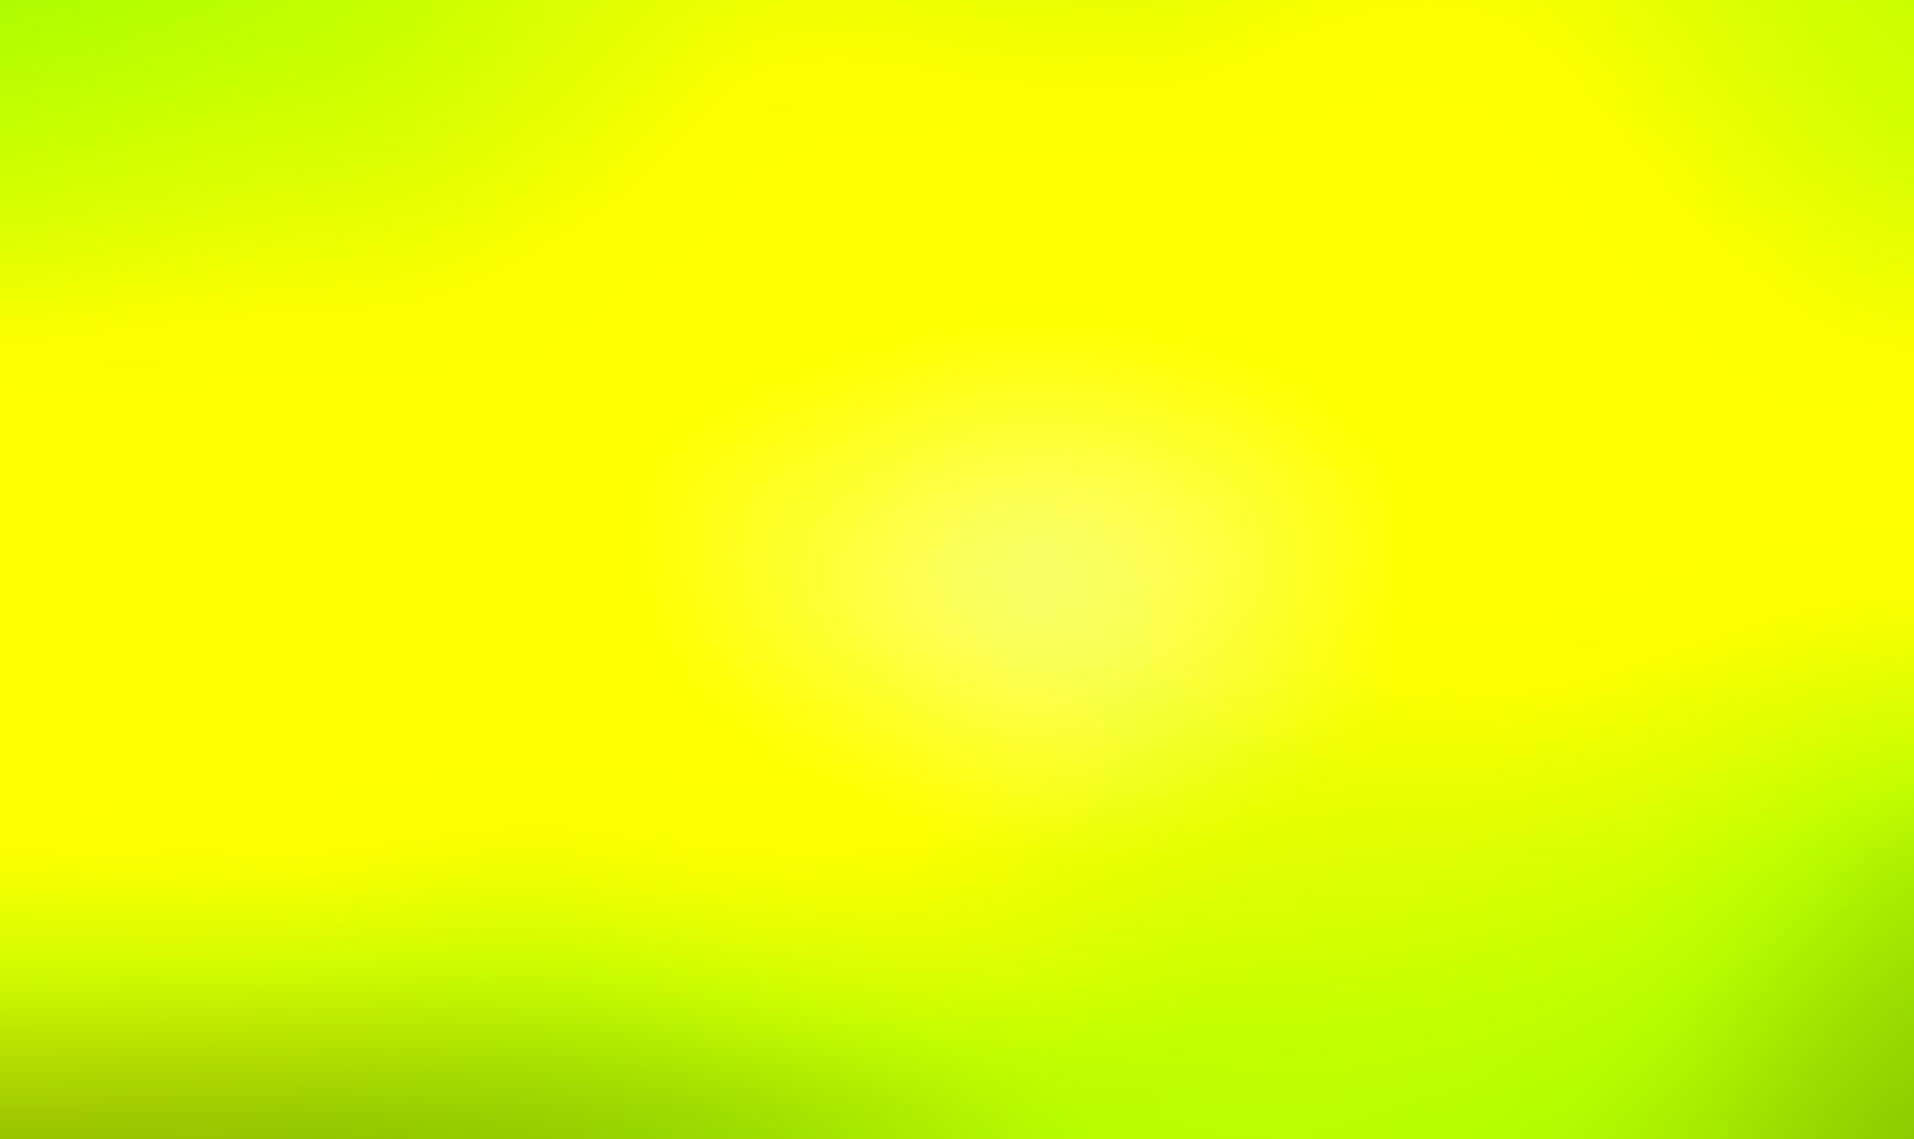 A Yellow And Green Blurry Background